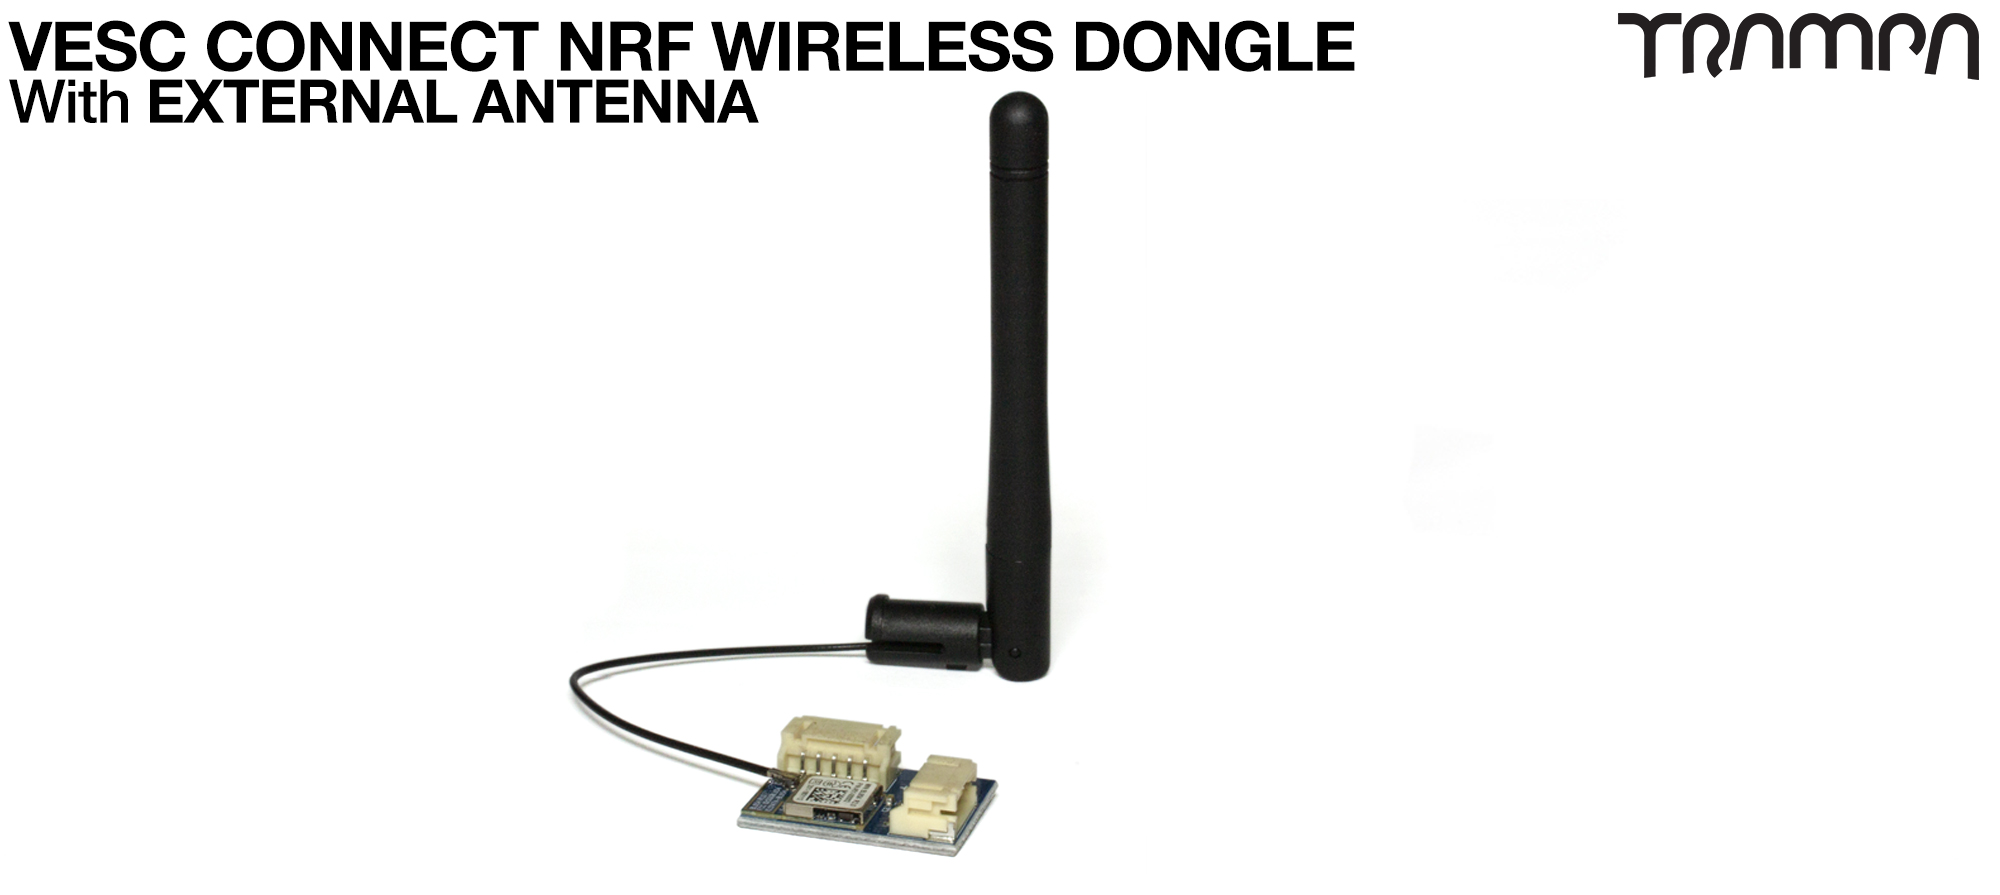 2x VESC Connect NRF Dongle with EXTERNAL ANTENNA ARIAL (+£62.50)